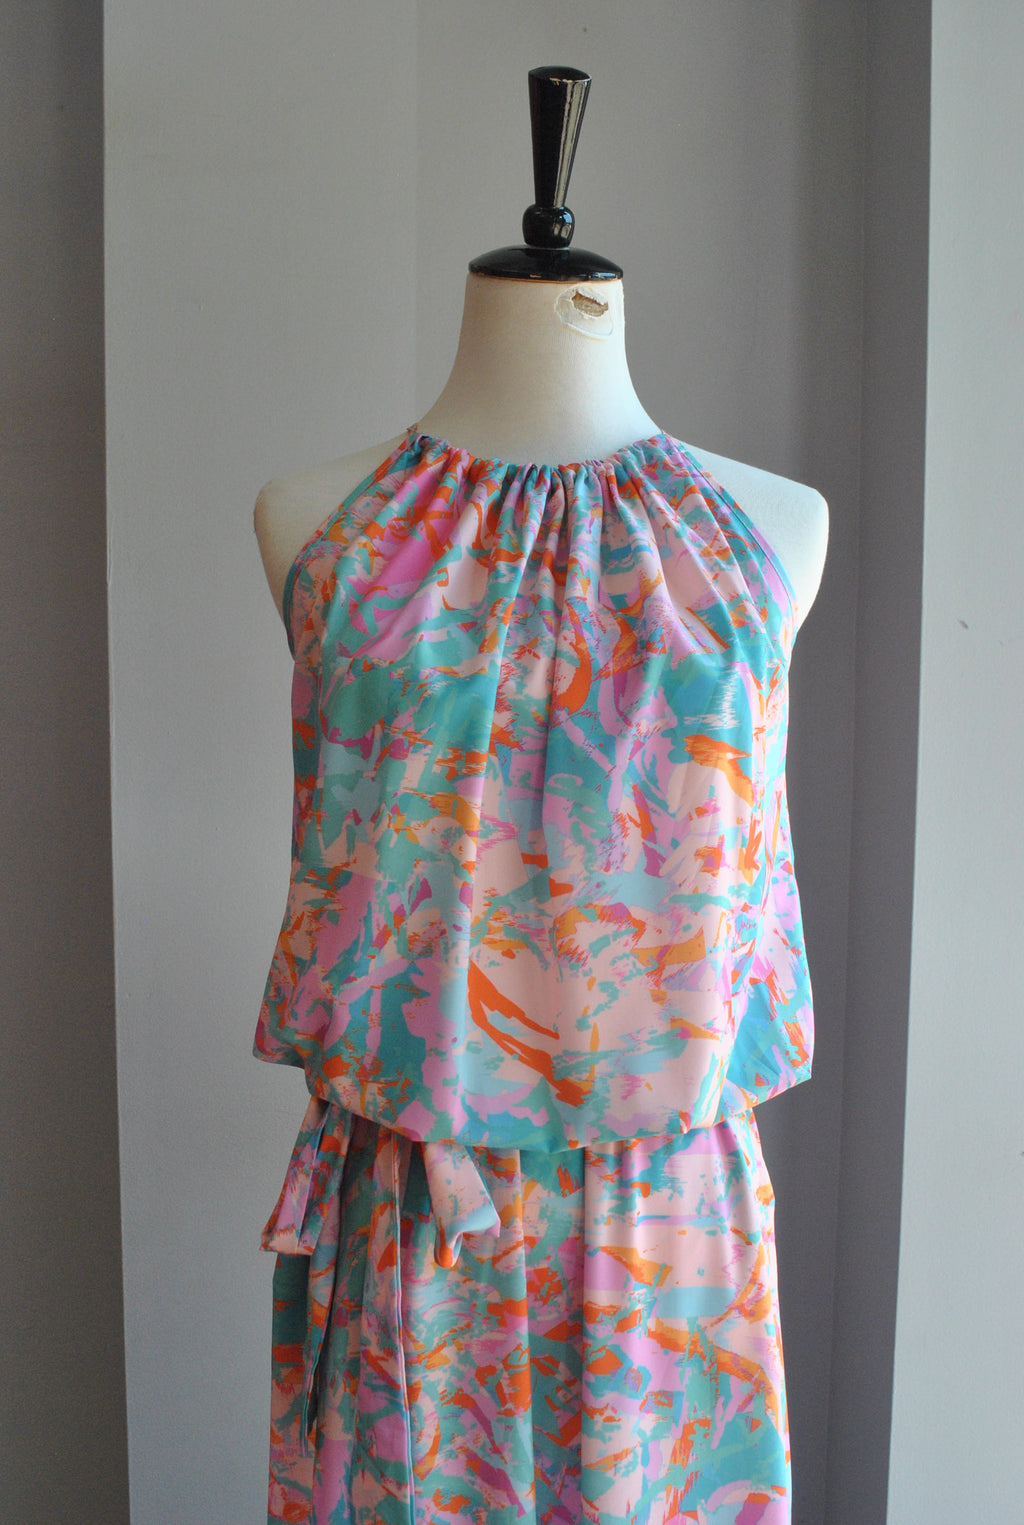 MULTICOLOR SUMMER DRESS - ONE SIZE